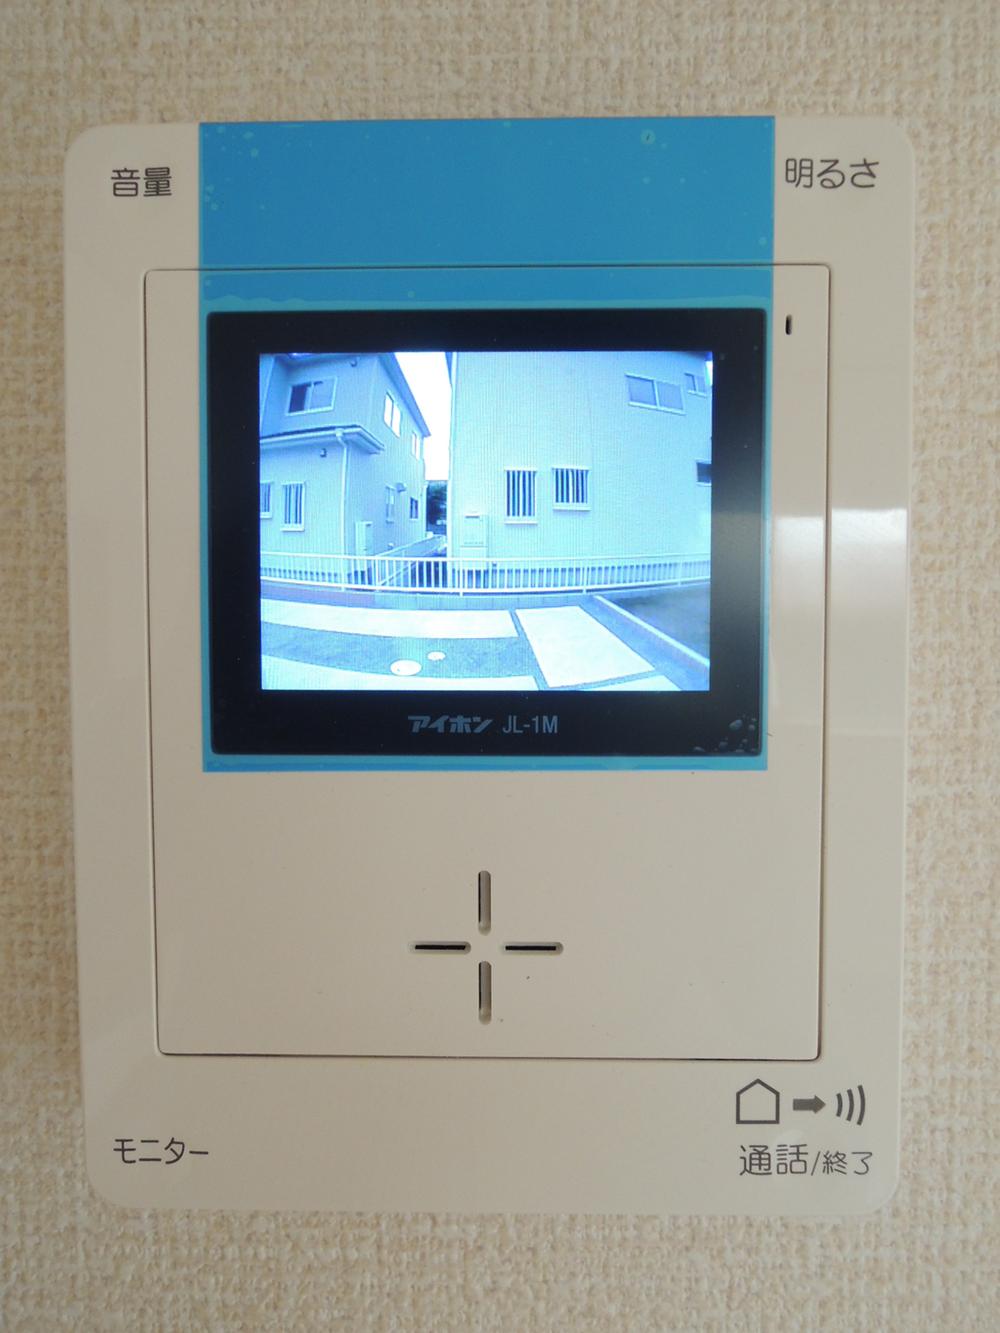 Security equipment. Color monitor phone